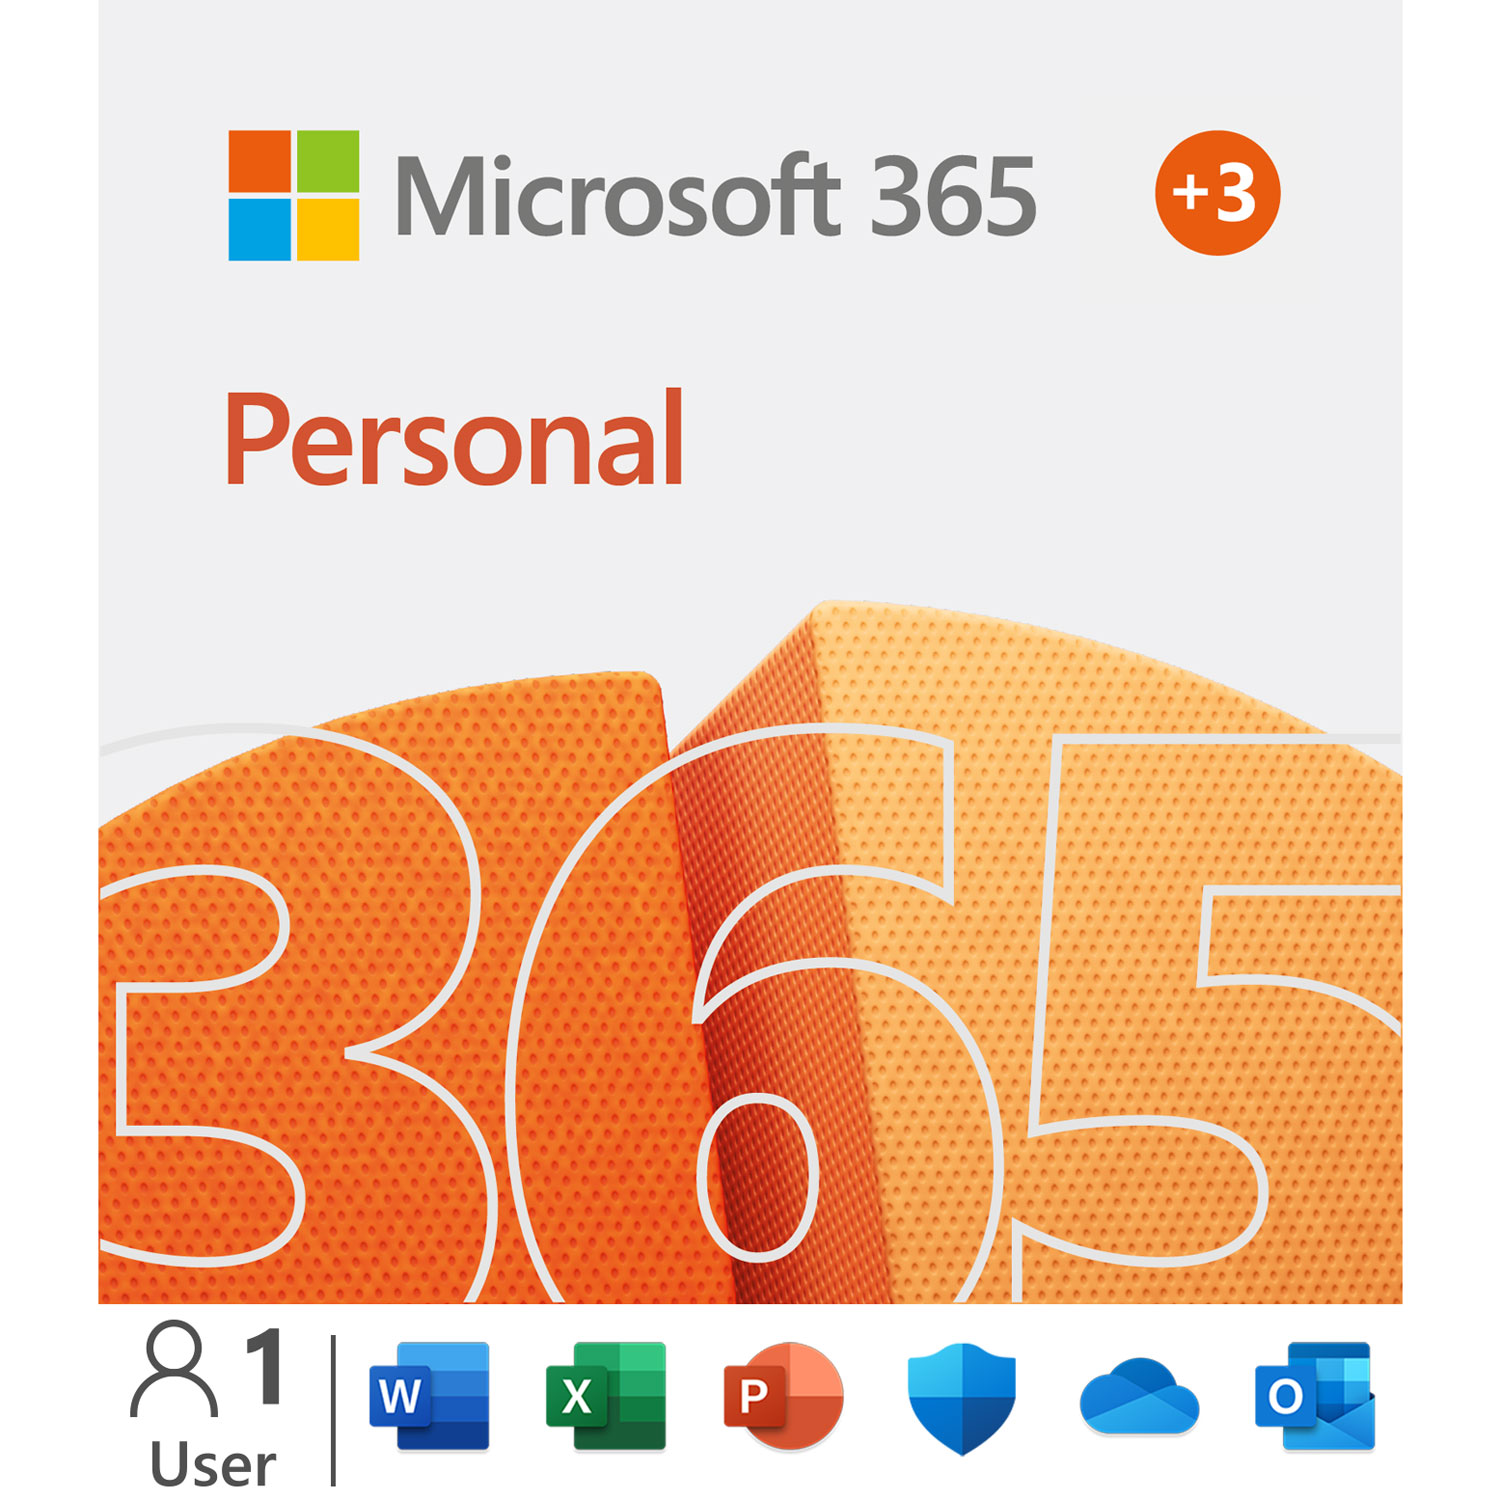 Microsoft 365 Personal (PC/Mac) - 1 User - 15 Month - Digital Download - Not Sold Separately